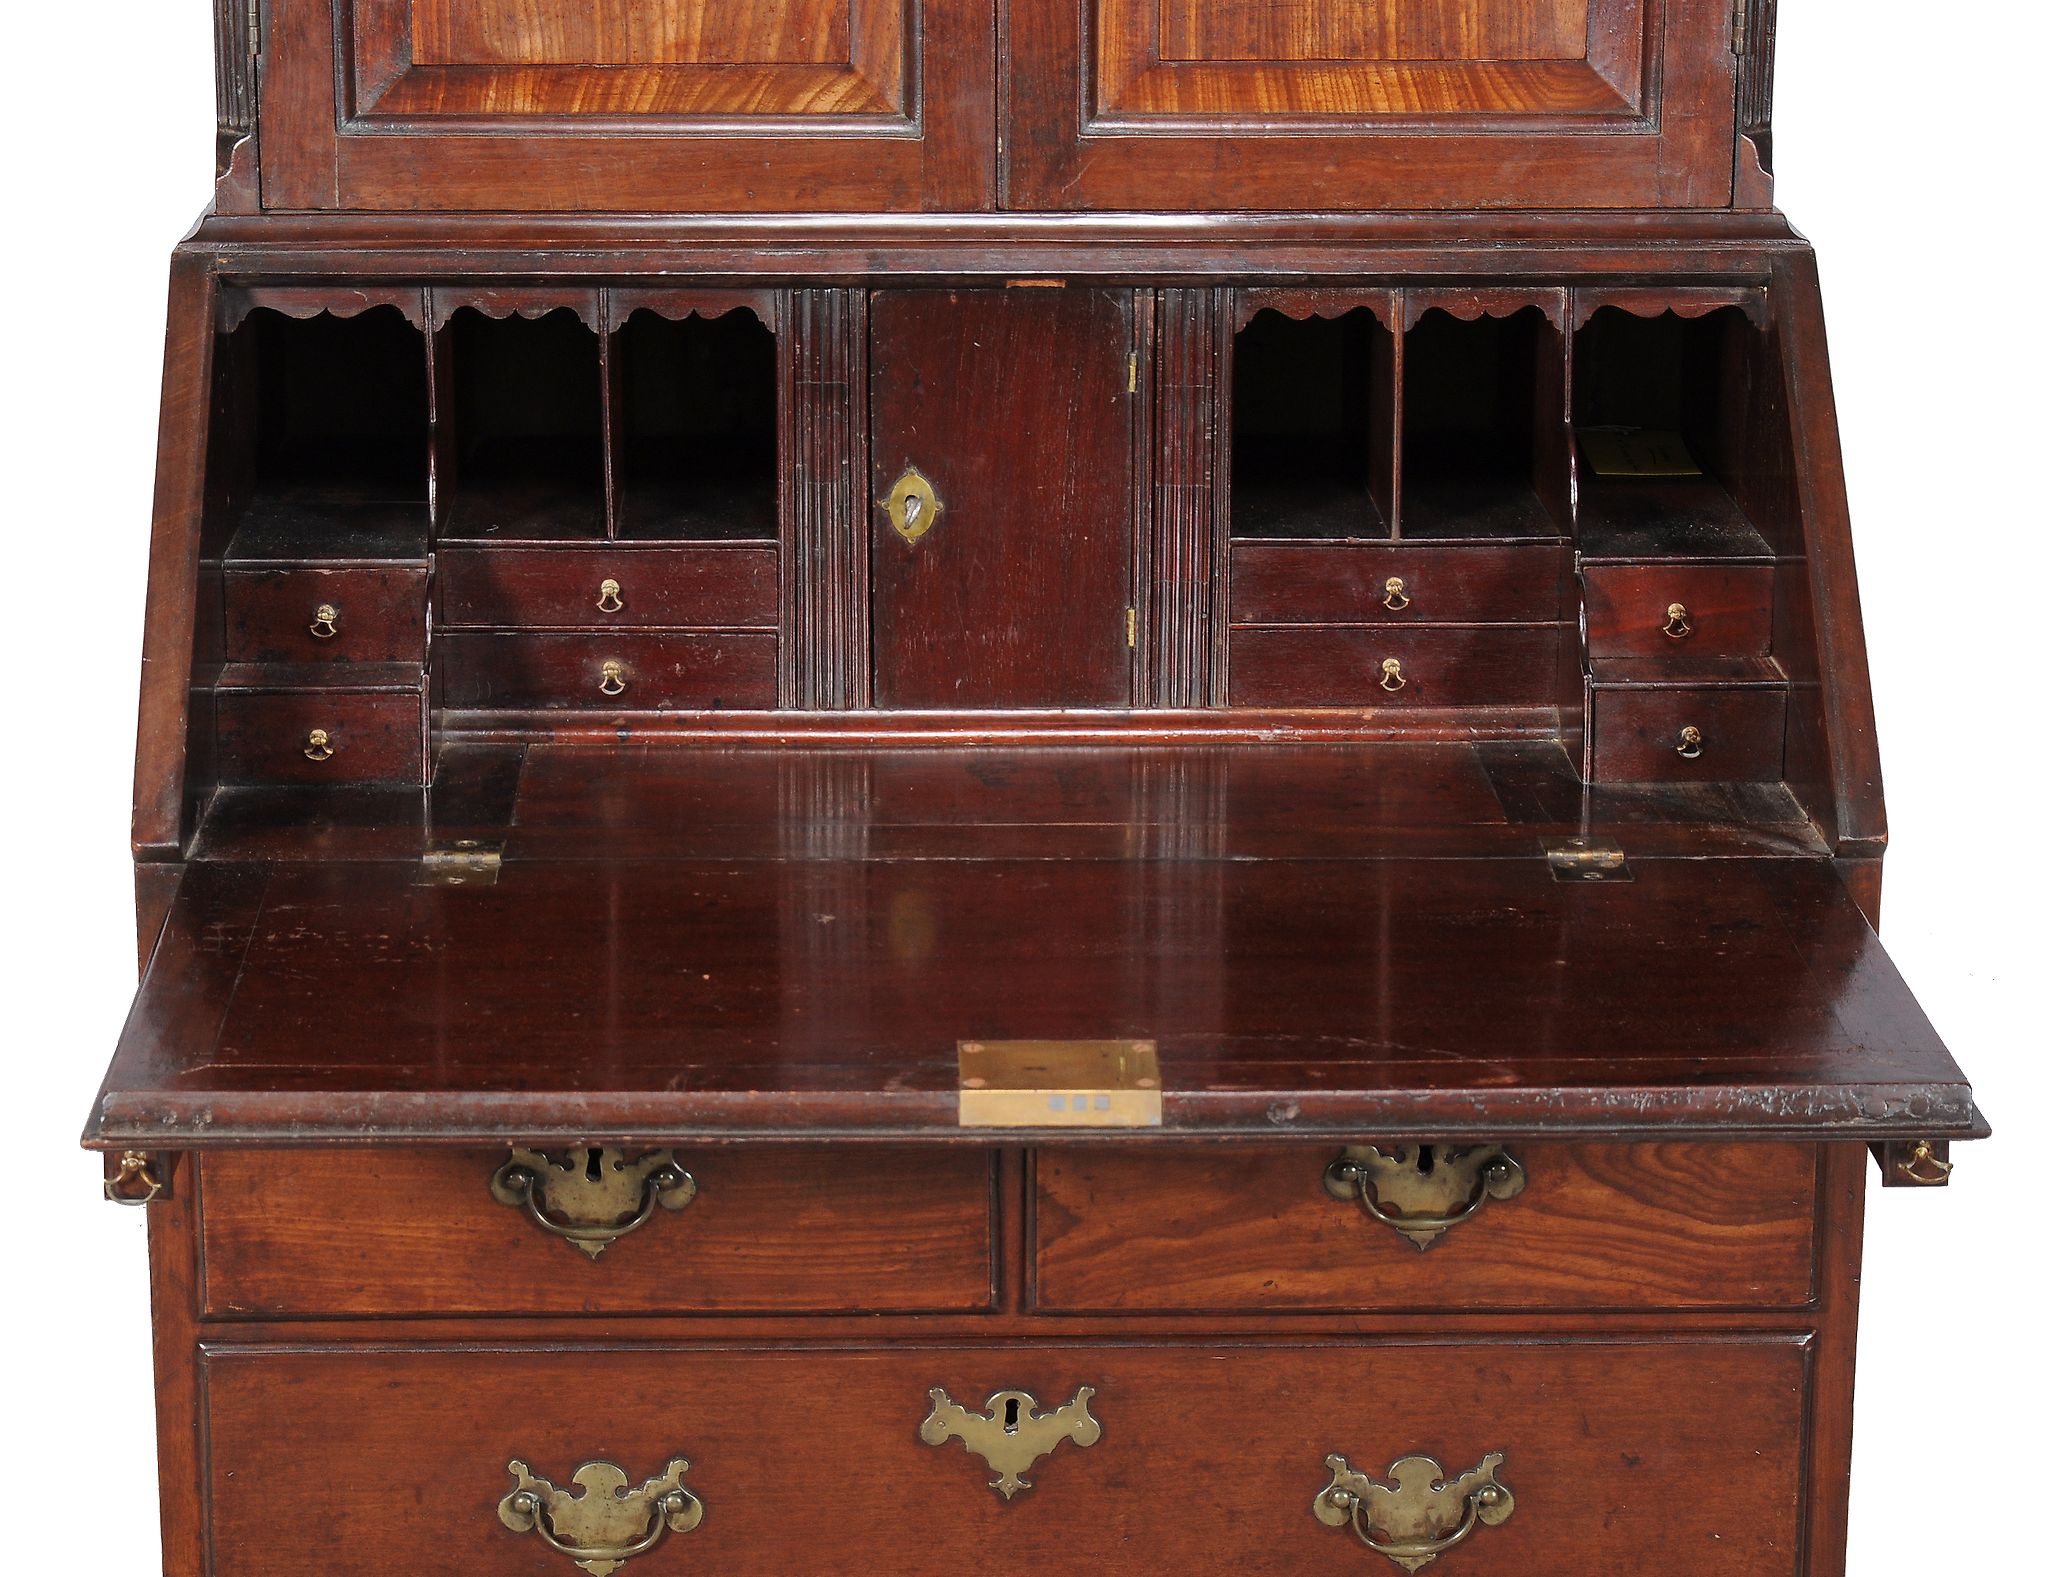 A George II mahogany bureau cabinet, circa 1750, the moulded cornice above a pair of panelled doors - Image 3 of 5